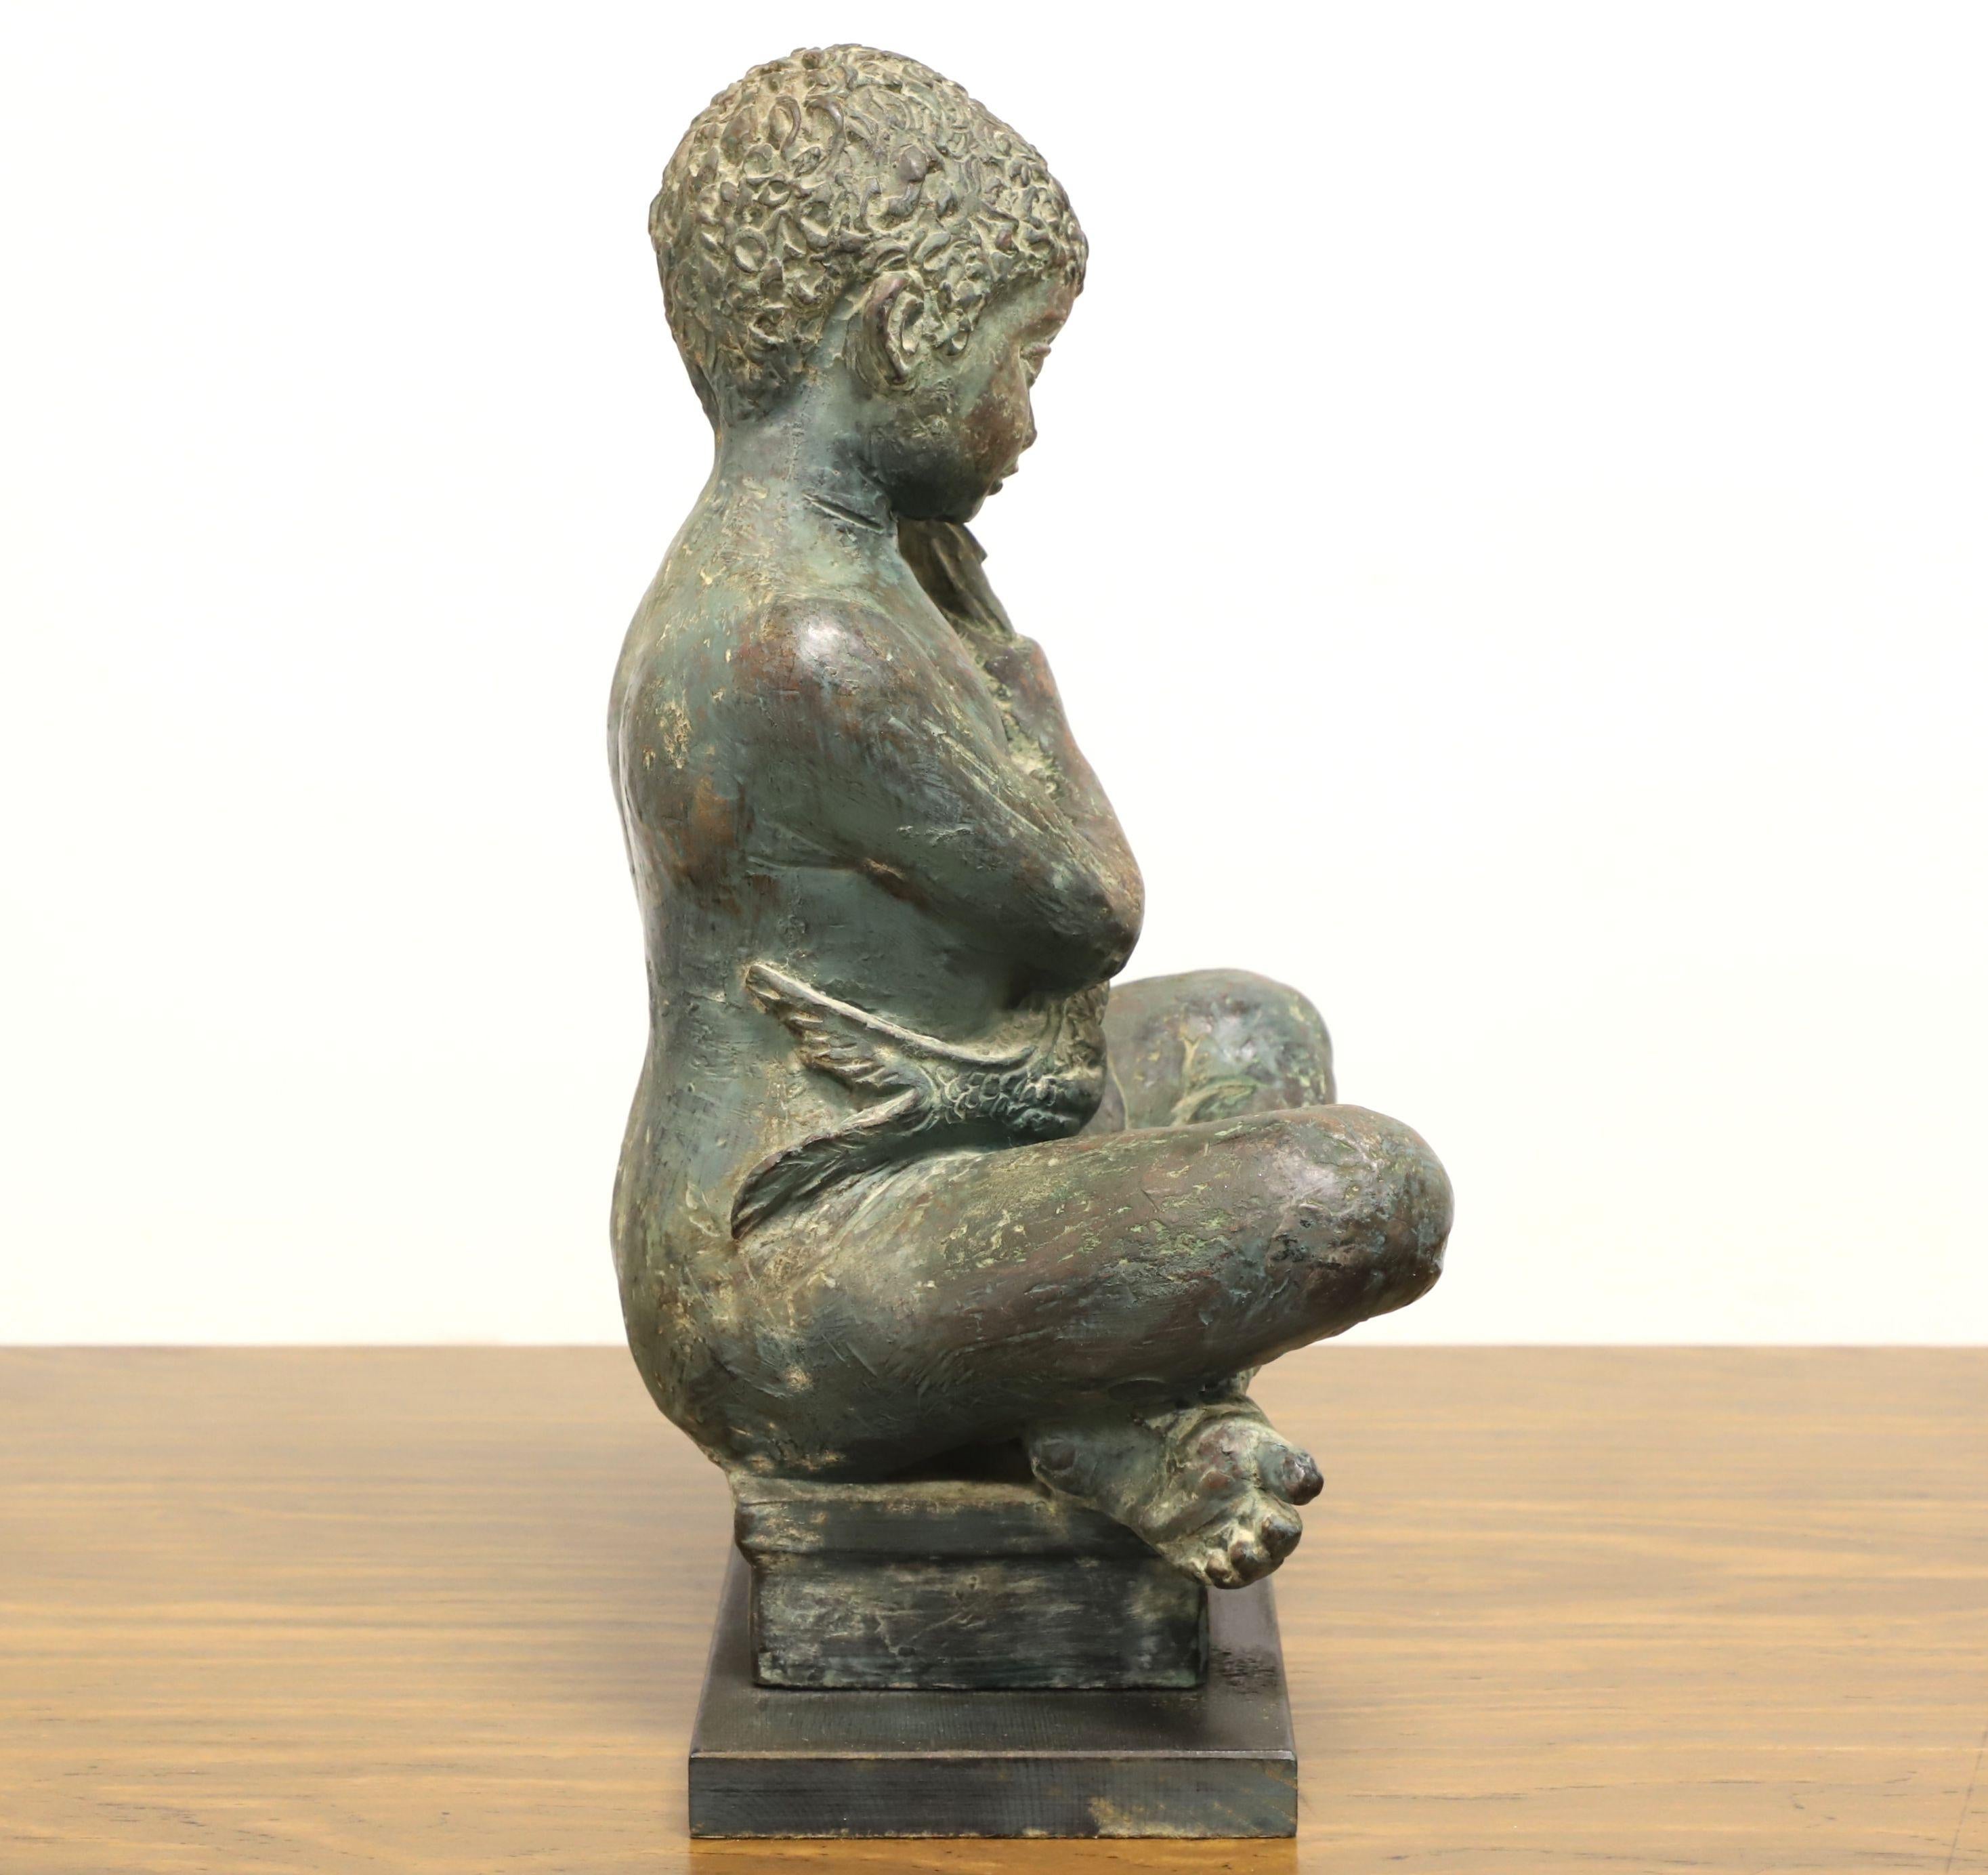 A patinated bronze sculpture depicting a boy seated cross legged on a cushion holding a fish. Unsigned, artist unknown. Solid bronze with patinated green tone and on bronze base. Origin unknown, likely Mediterranean region, and produced in the mid